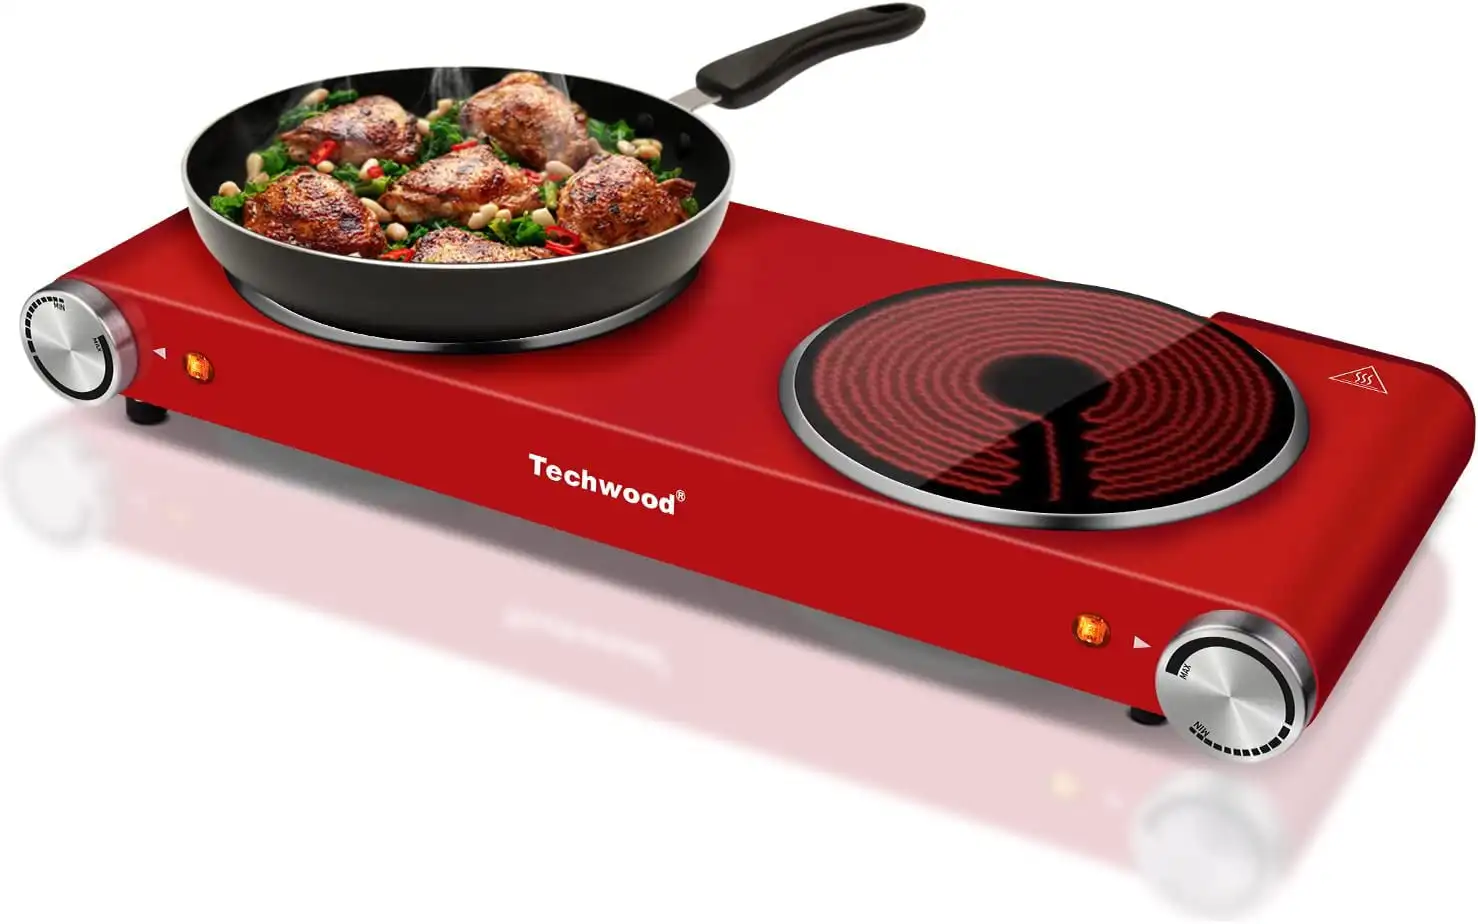 1800W  Hot Plate, Countertop Stove Double Burner for Cooking, Infrared Ceramic Hot Plates Double Cooktop, Red, Brushed Stainless